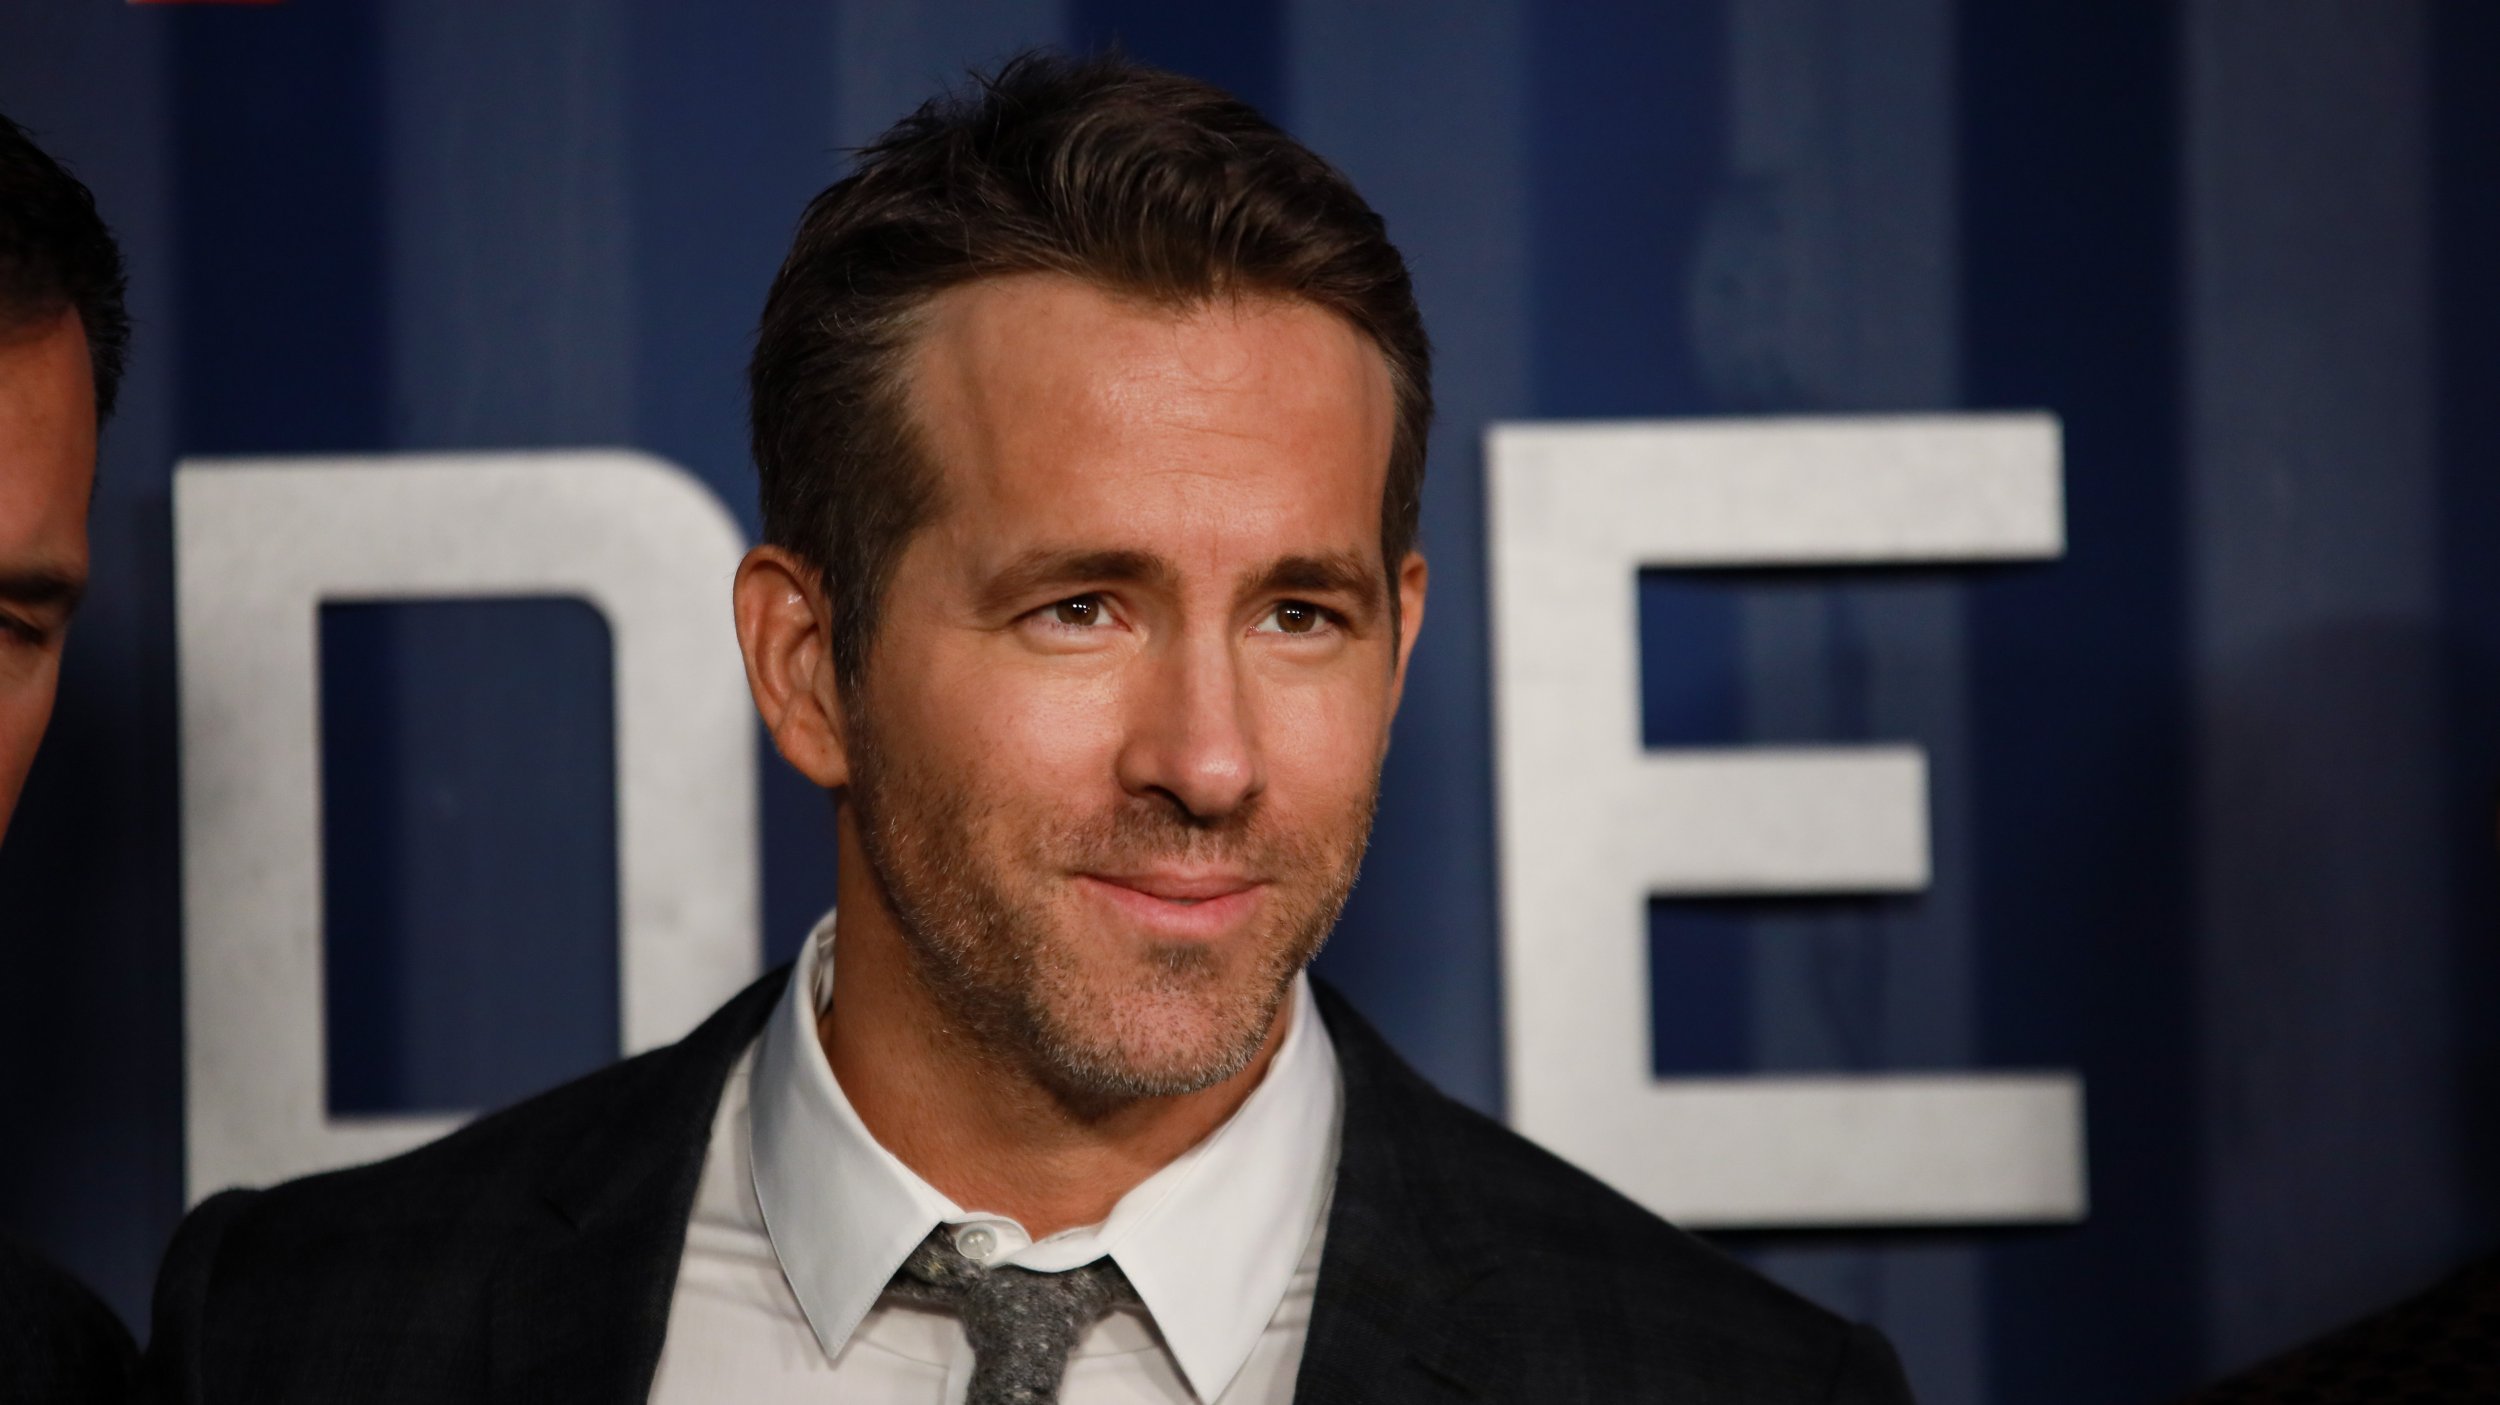 Ryan Reynolds Net Worth And Assets Here Are The Companies He Owns